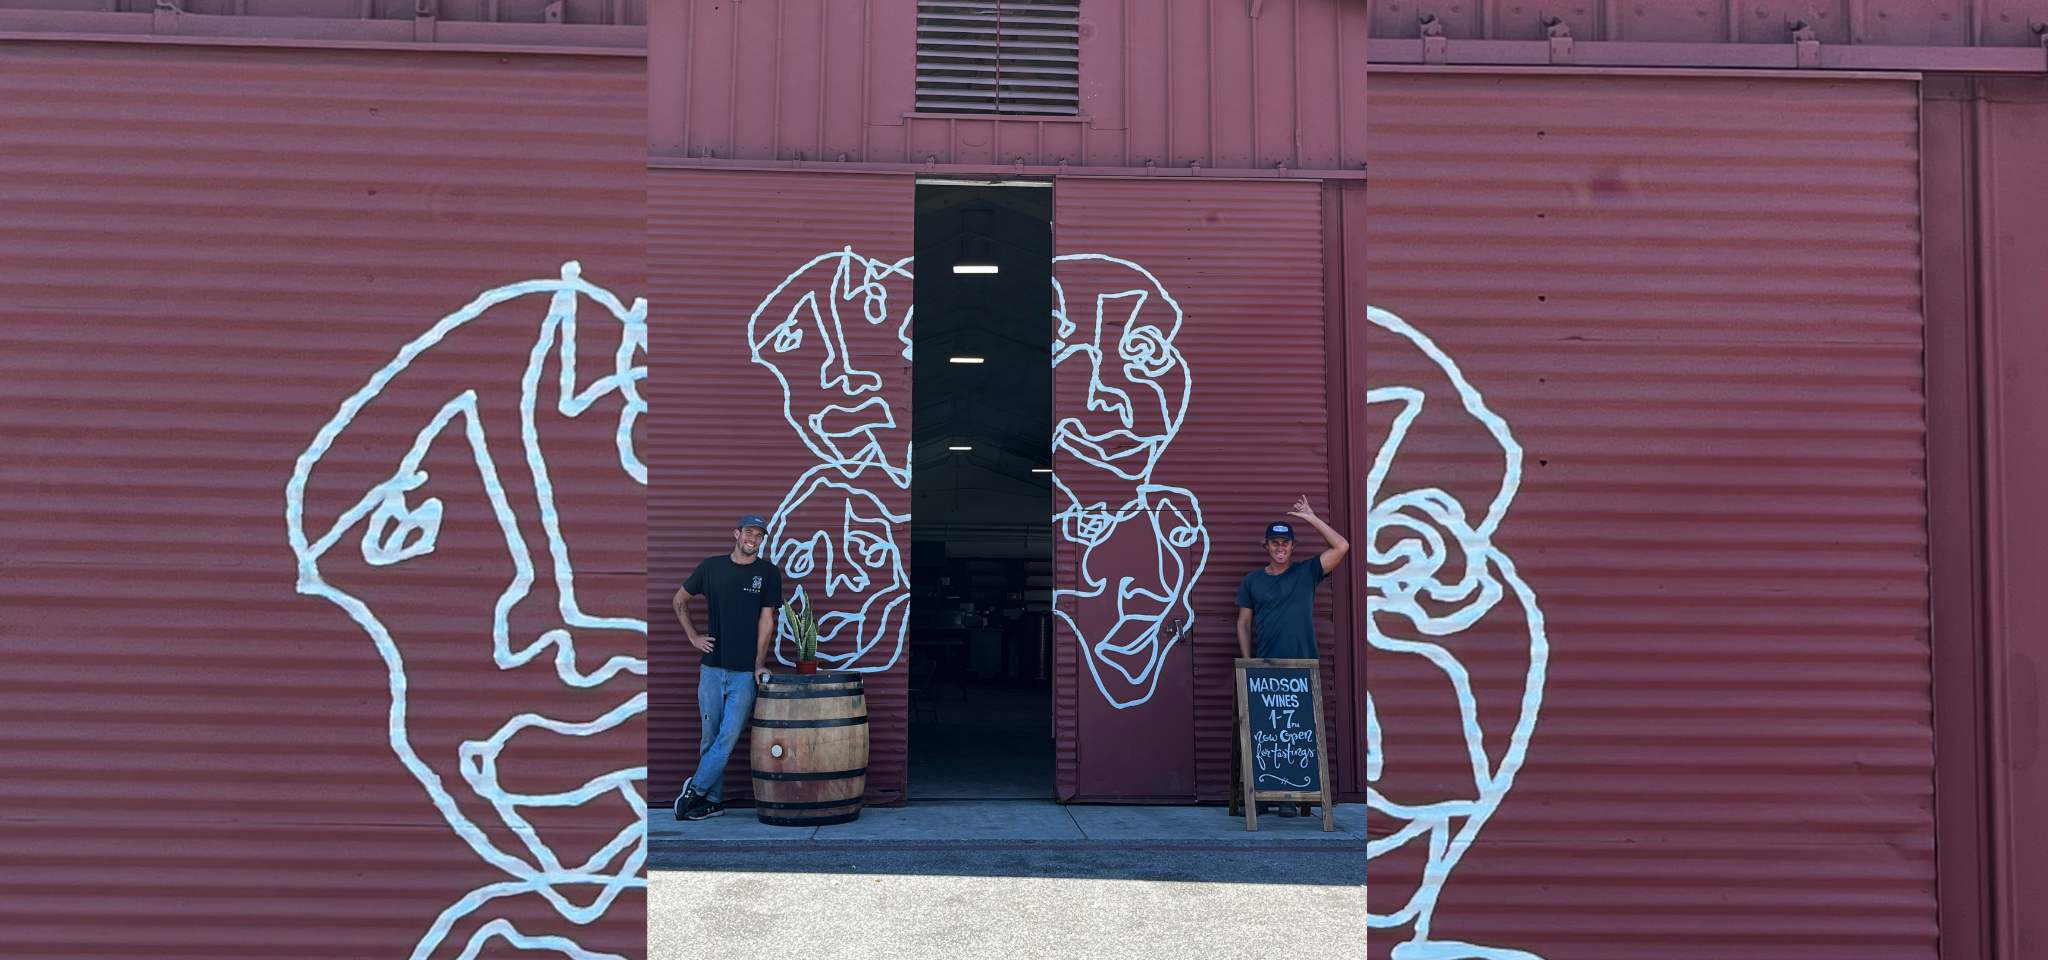 the exterior of Madson tasting room